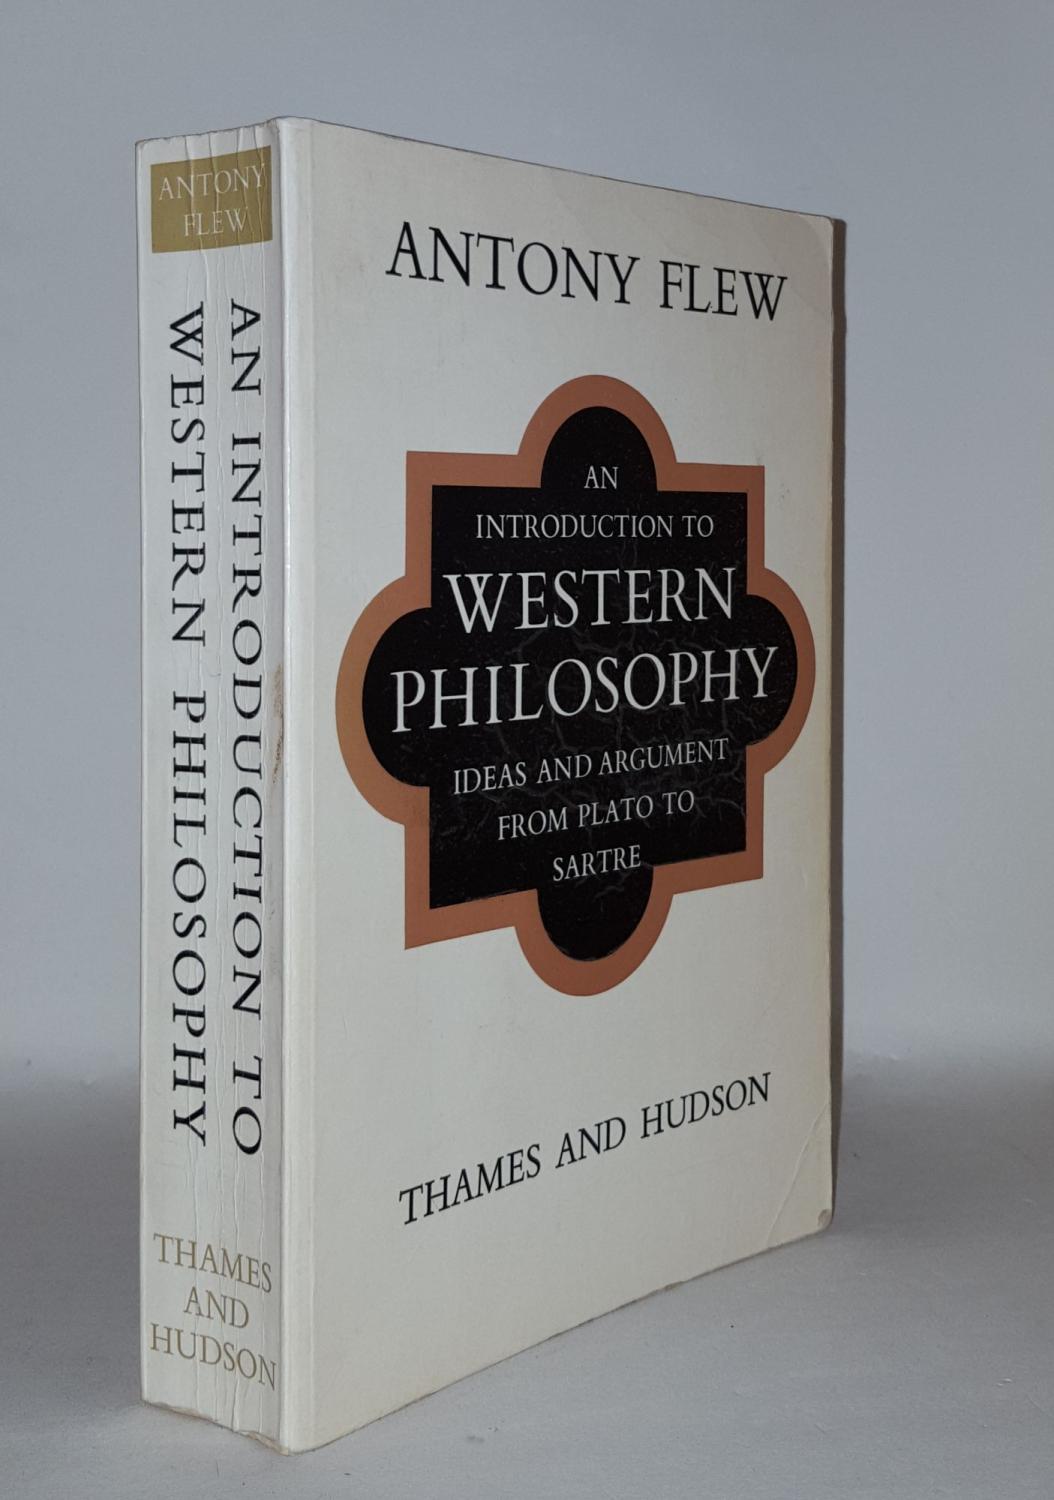 AN INTRODUCTION TO WESTERN PHILOSOPHY by FLEW Antony: (1971) | Rothwell ...